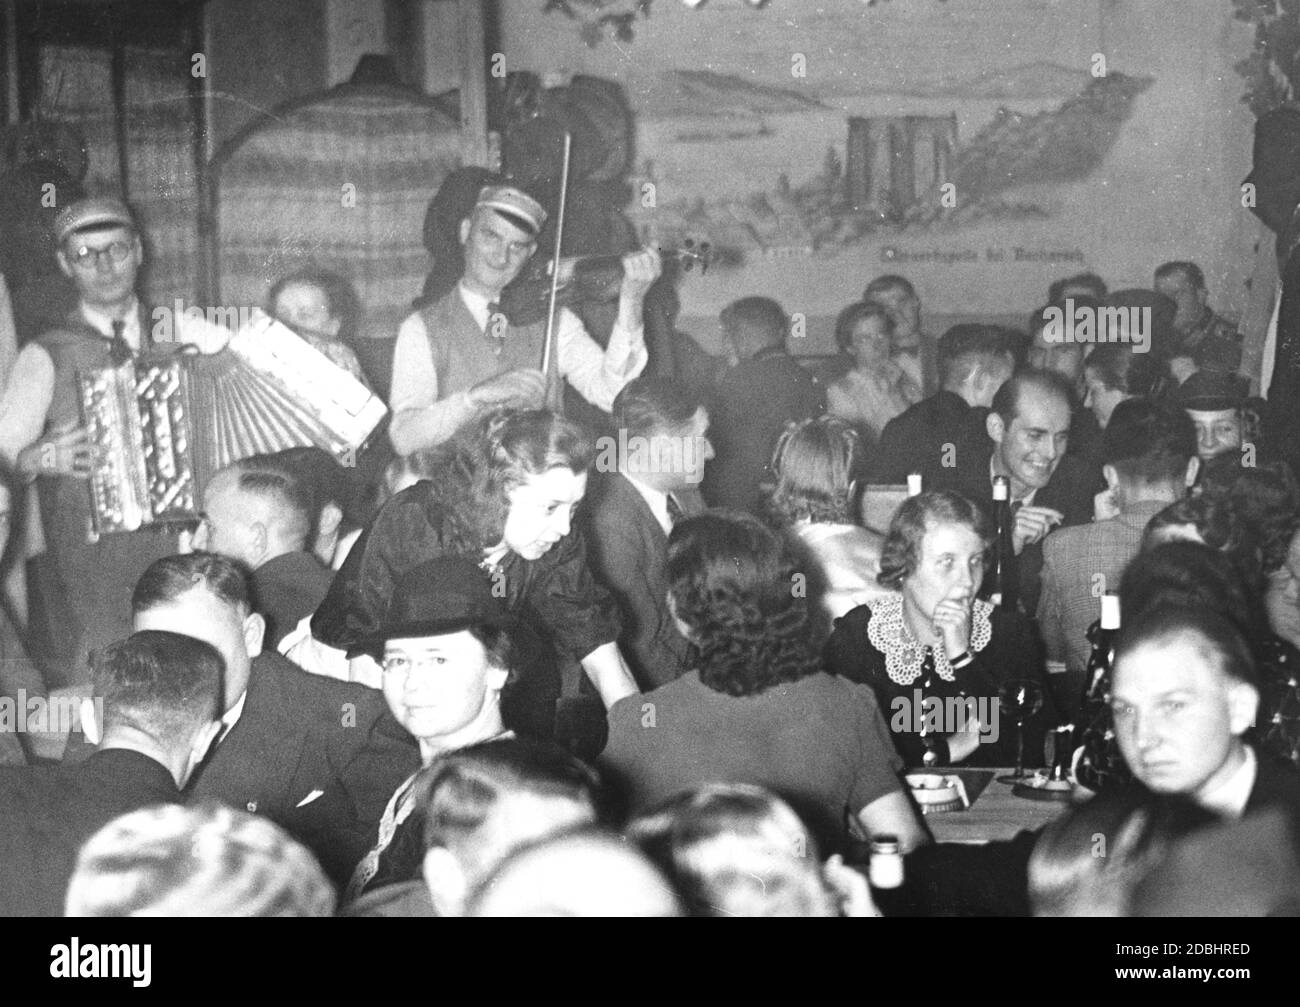 Berlin nightlife 1930s Black and White Stock Photos & Images - Alamy